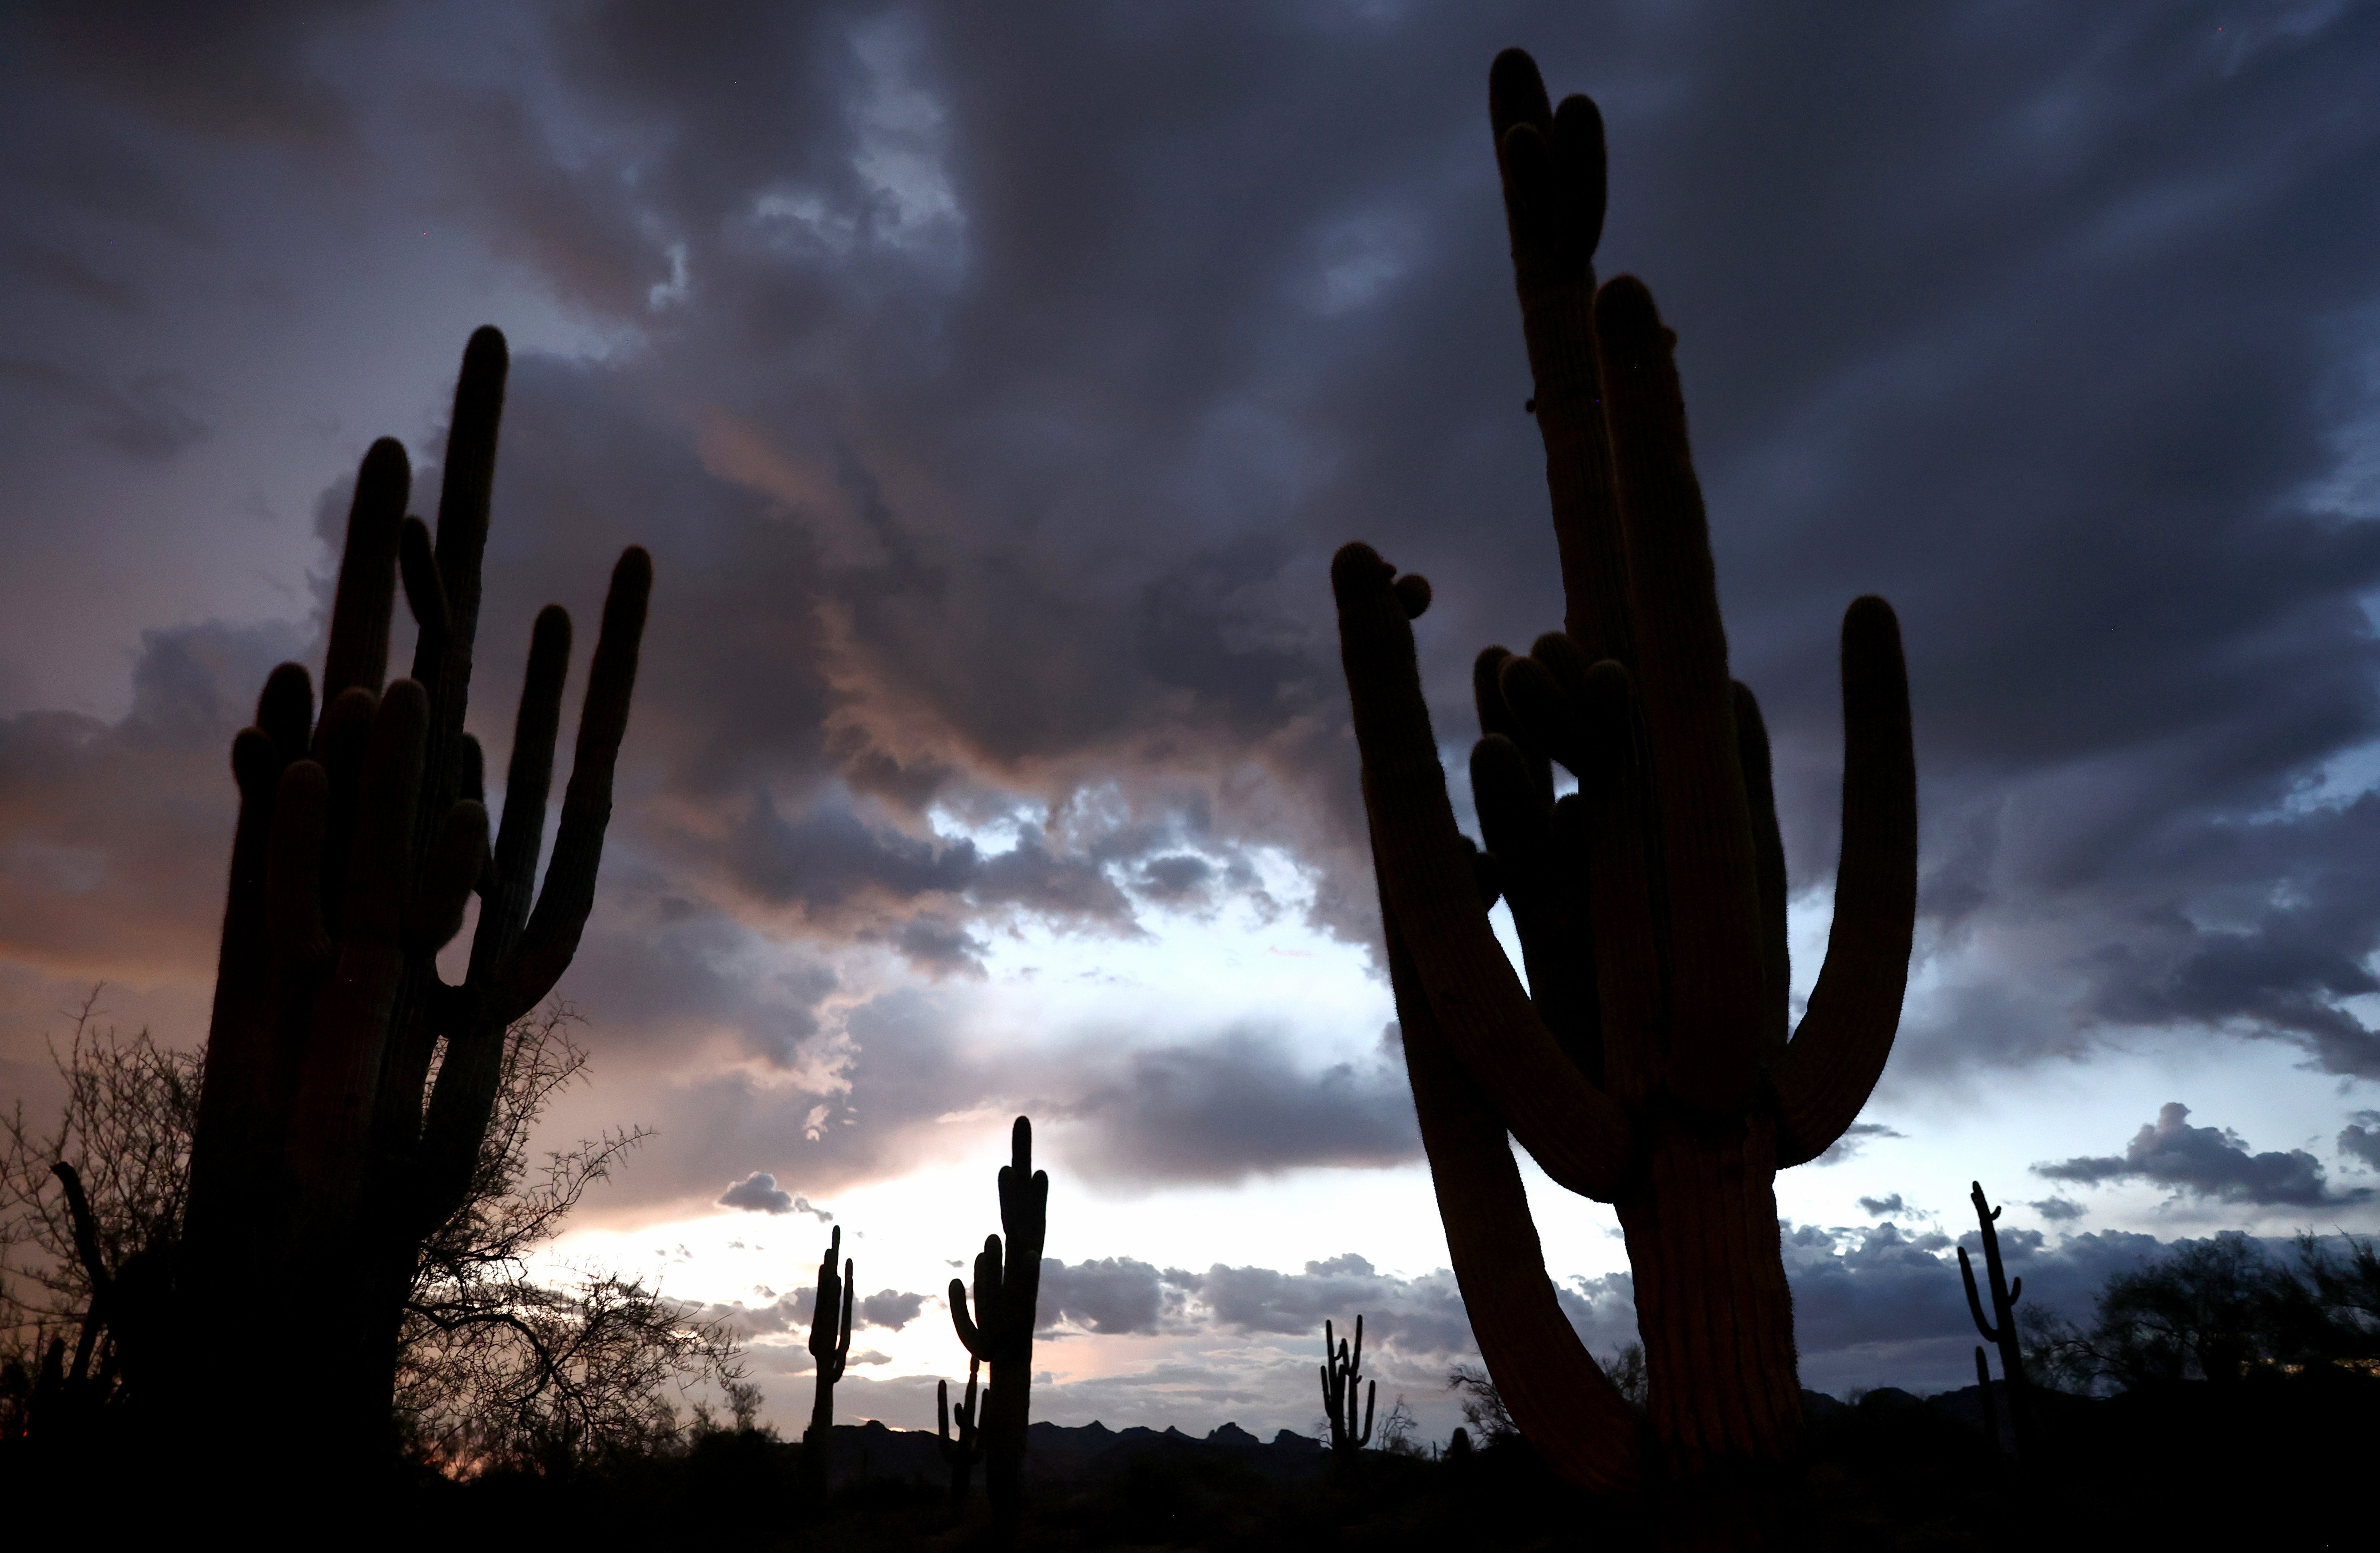 Saguaro framed against oncoming monsoon clouds. (Photo: Mario Tama, Getty Images)